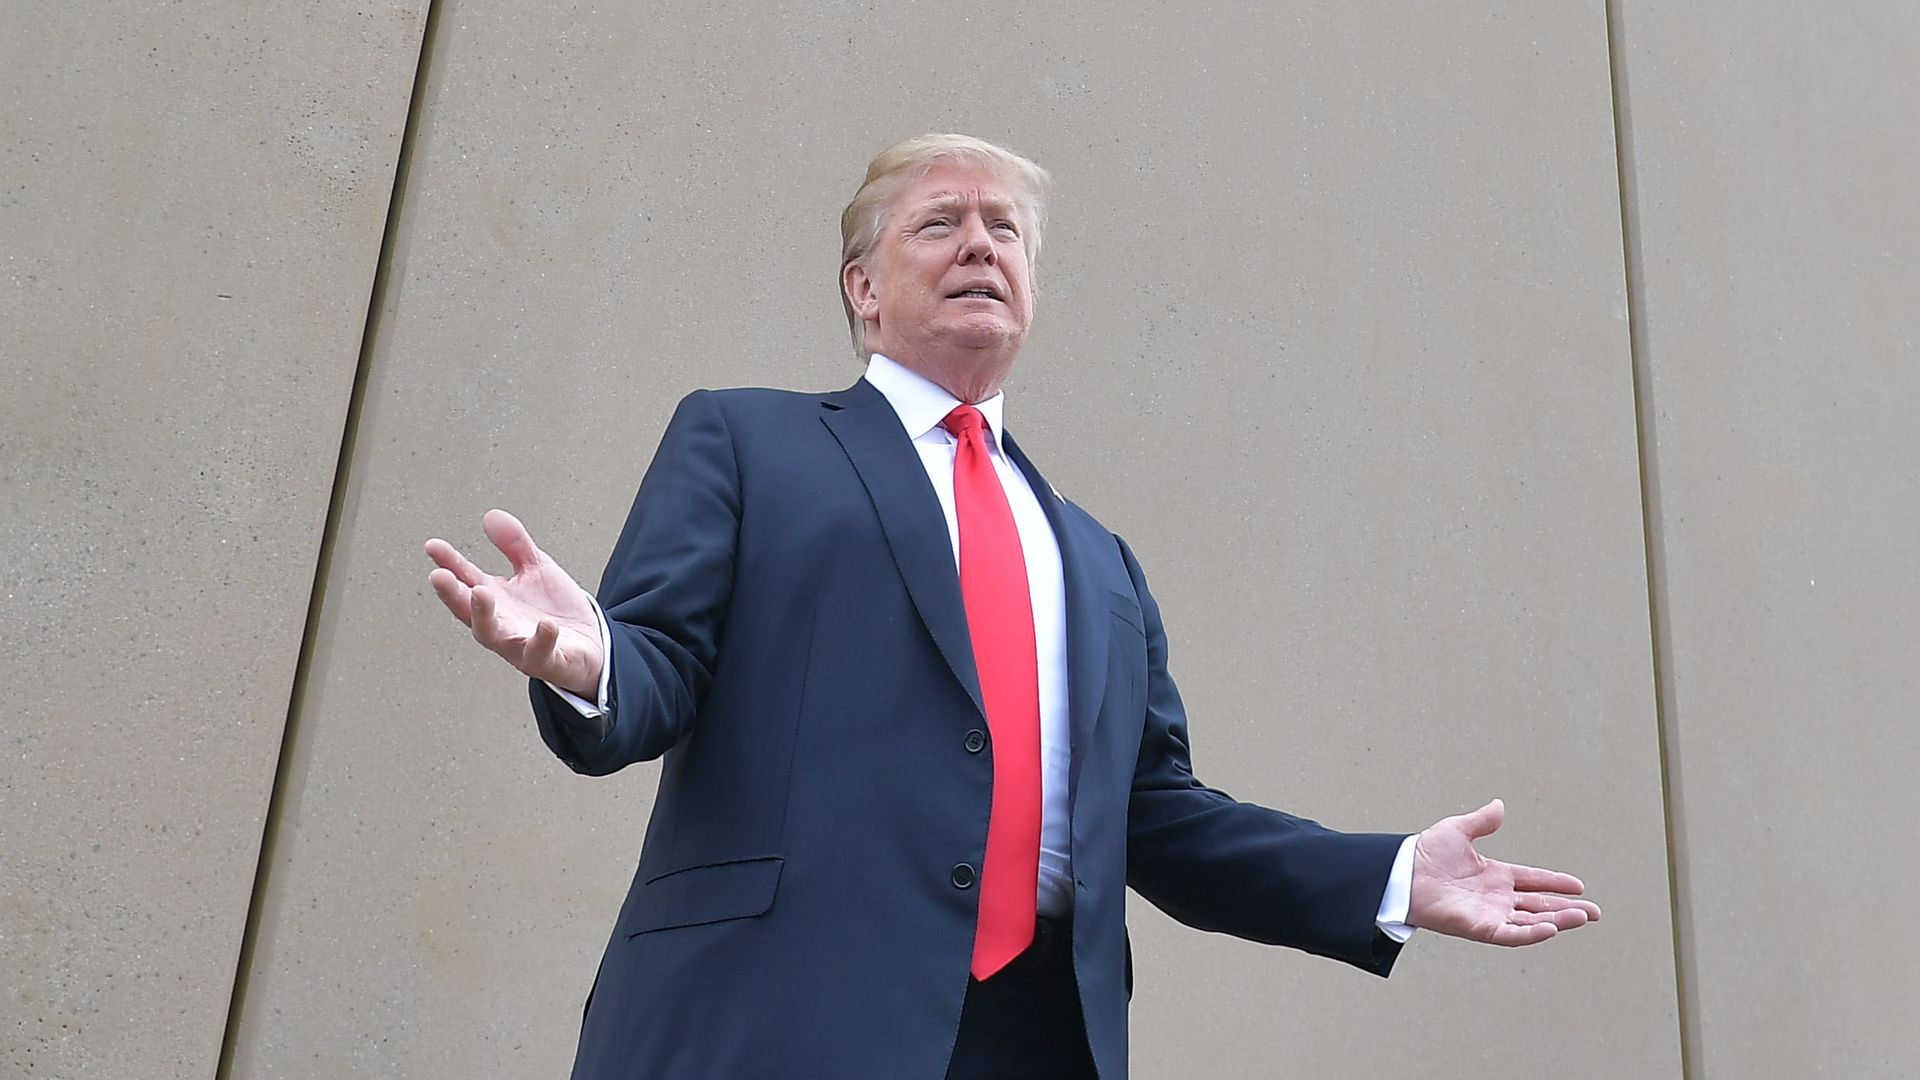 US President Donald Trump speaks as he inspects border wall prototypes in San Diego, California on March 13, 2018.